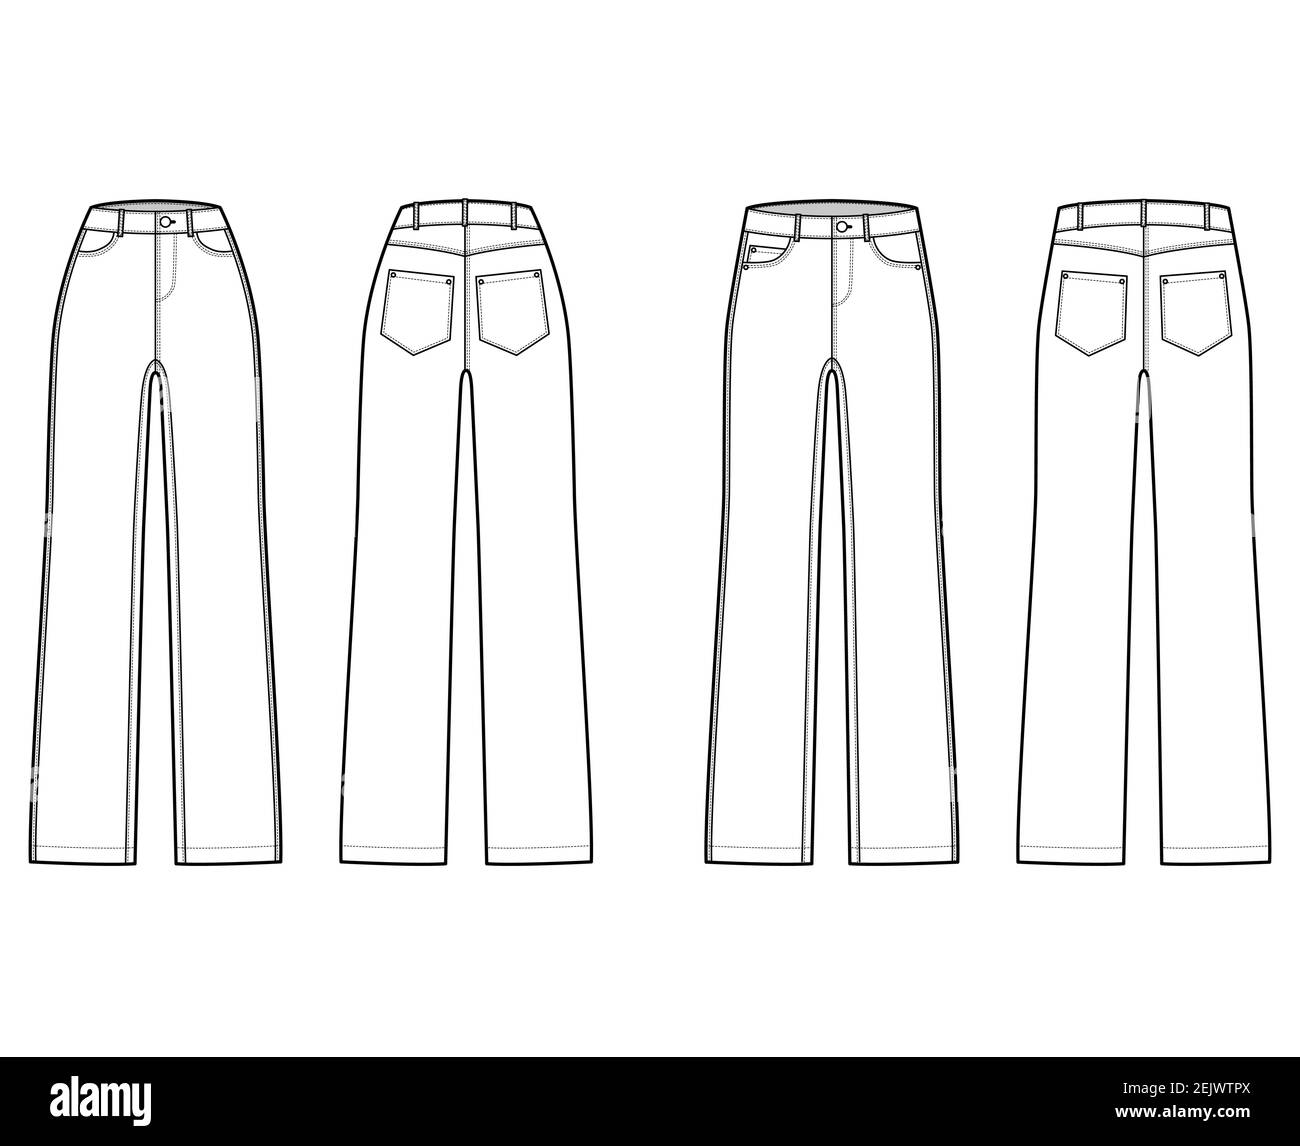 Set Of Straight Jeans Denim Pants Technical Fashion Illustration With